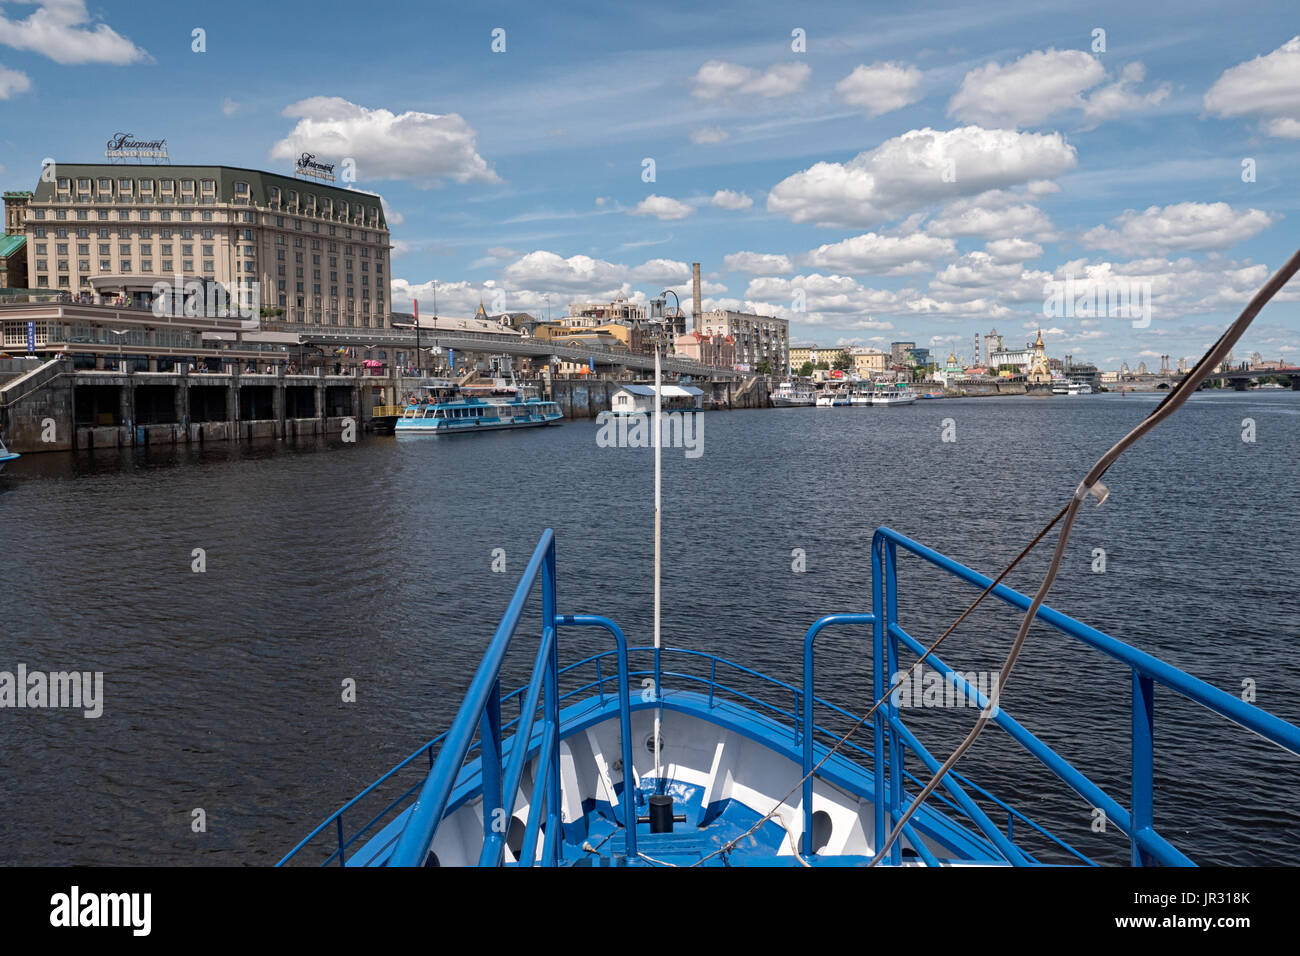 KYIV, UKRAINE - JUNE 12, 2016:  Bow of Tourist Boat in the River Port with the Fairmont Grand Hotel in the background on the Dnieper (Dnipro) River Stock Photo